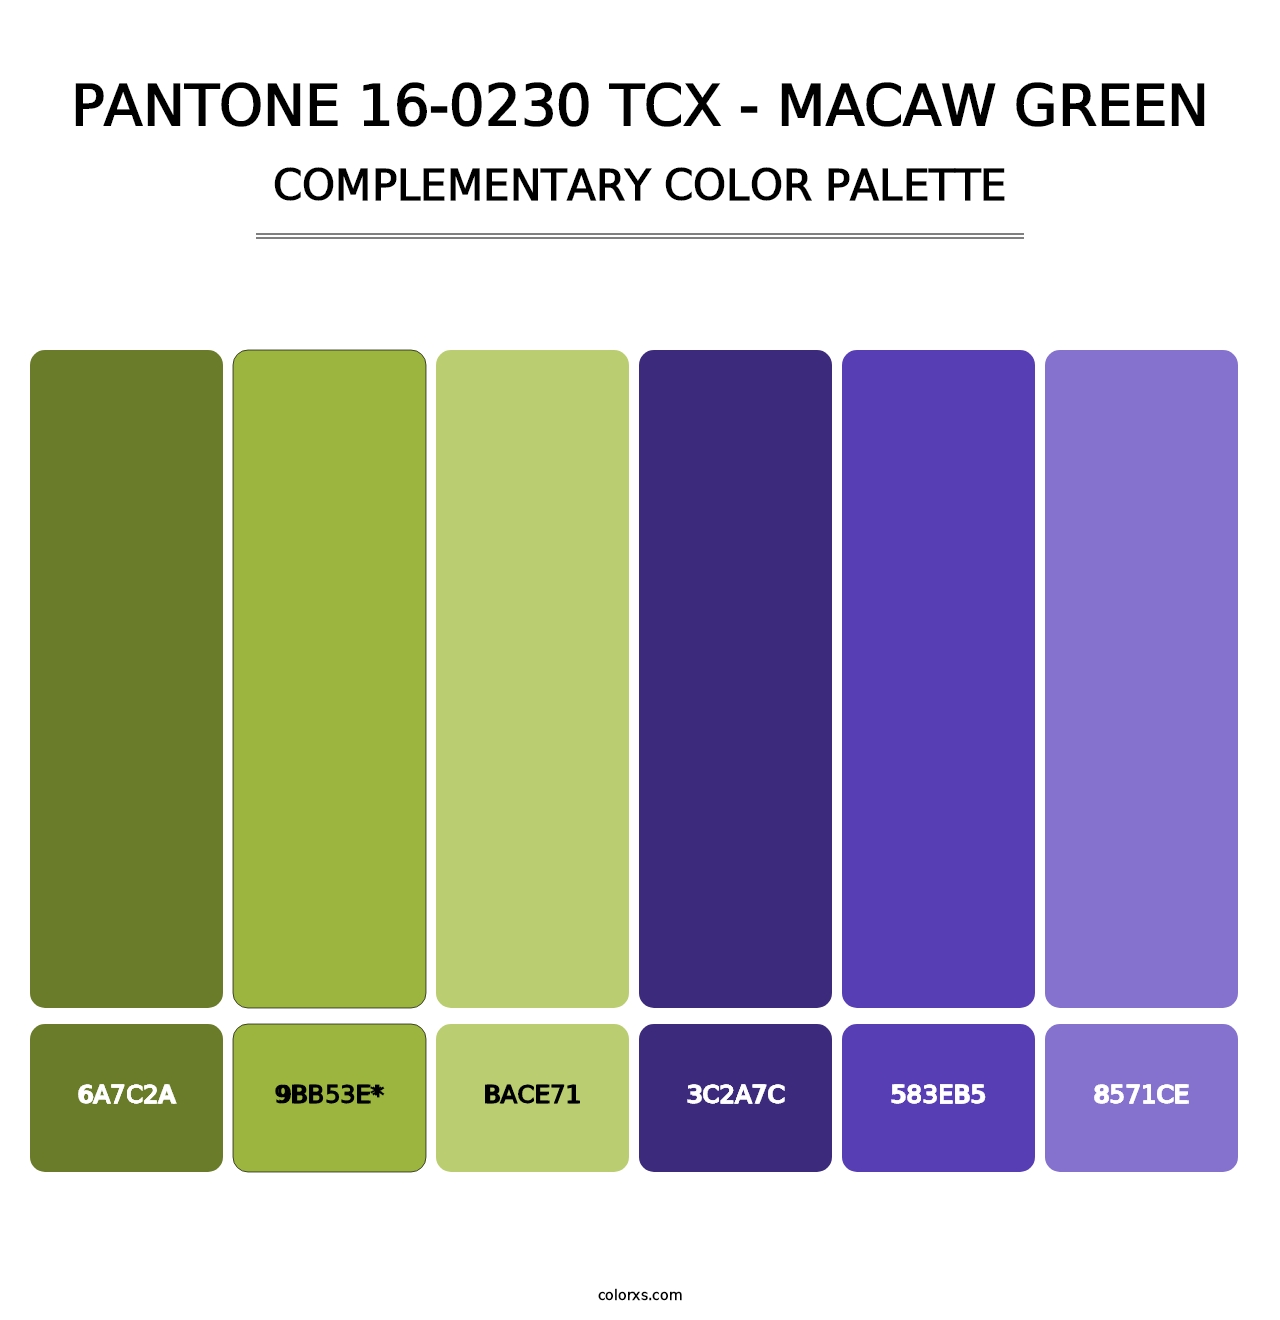 PANTONE 16-0230 TCX - Macaw Green - Complementary Color Palette